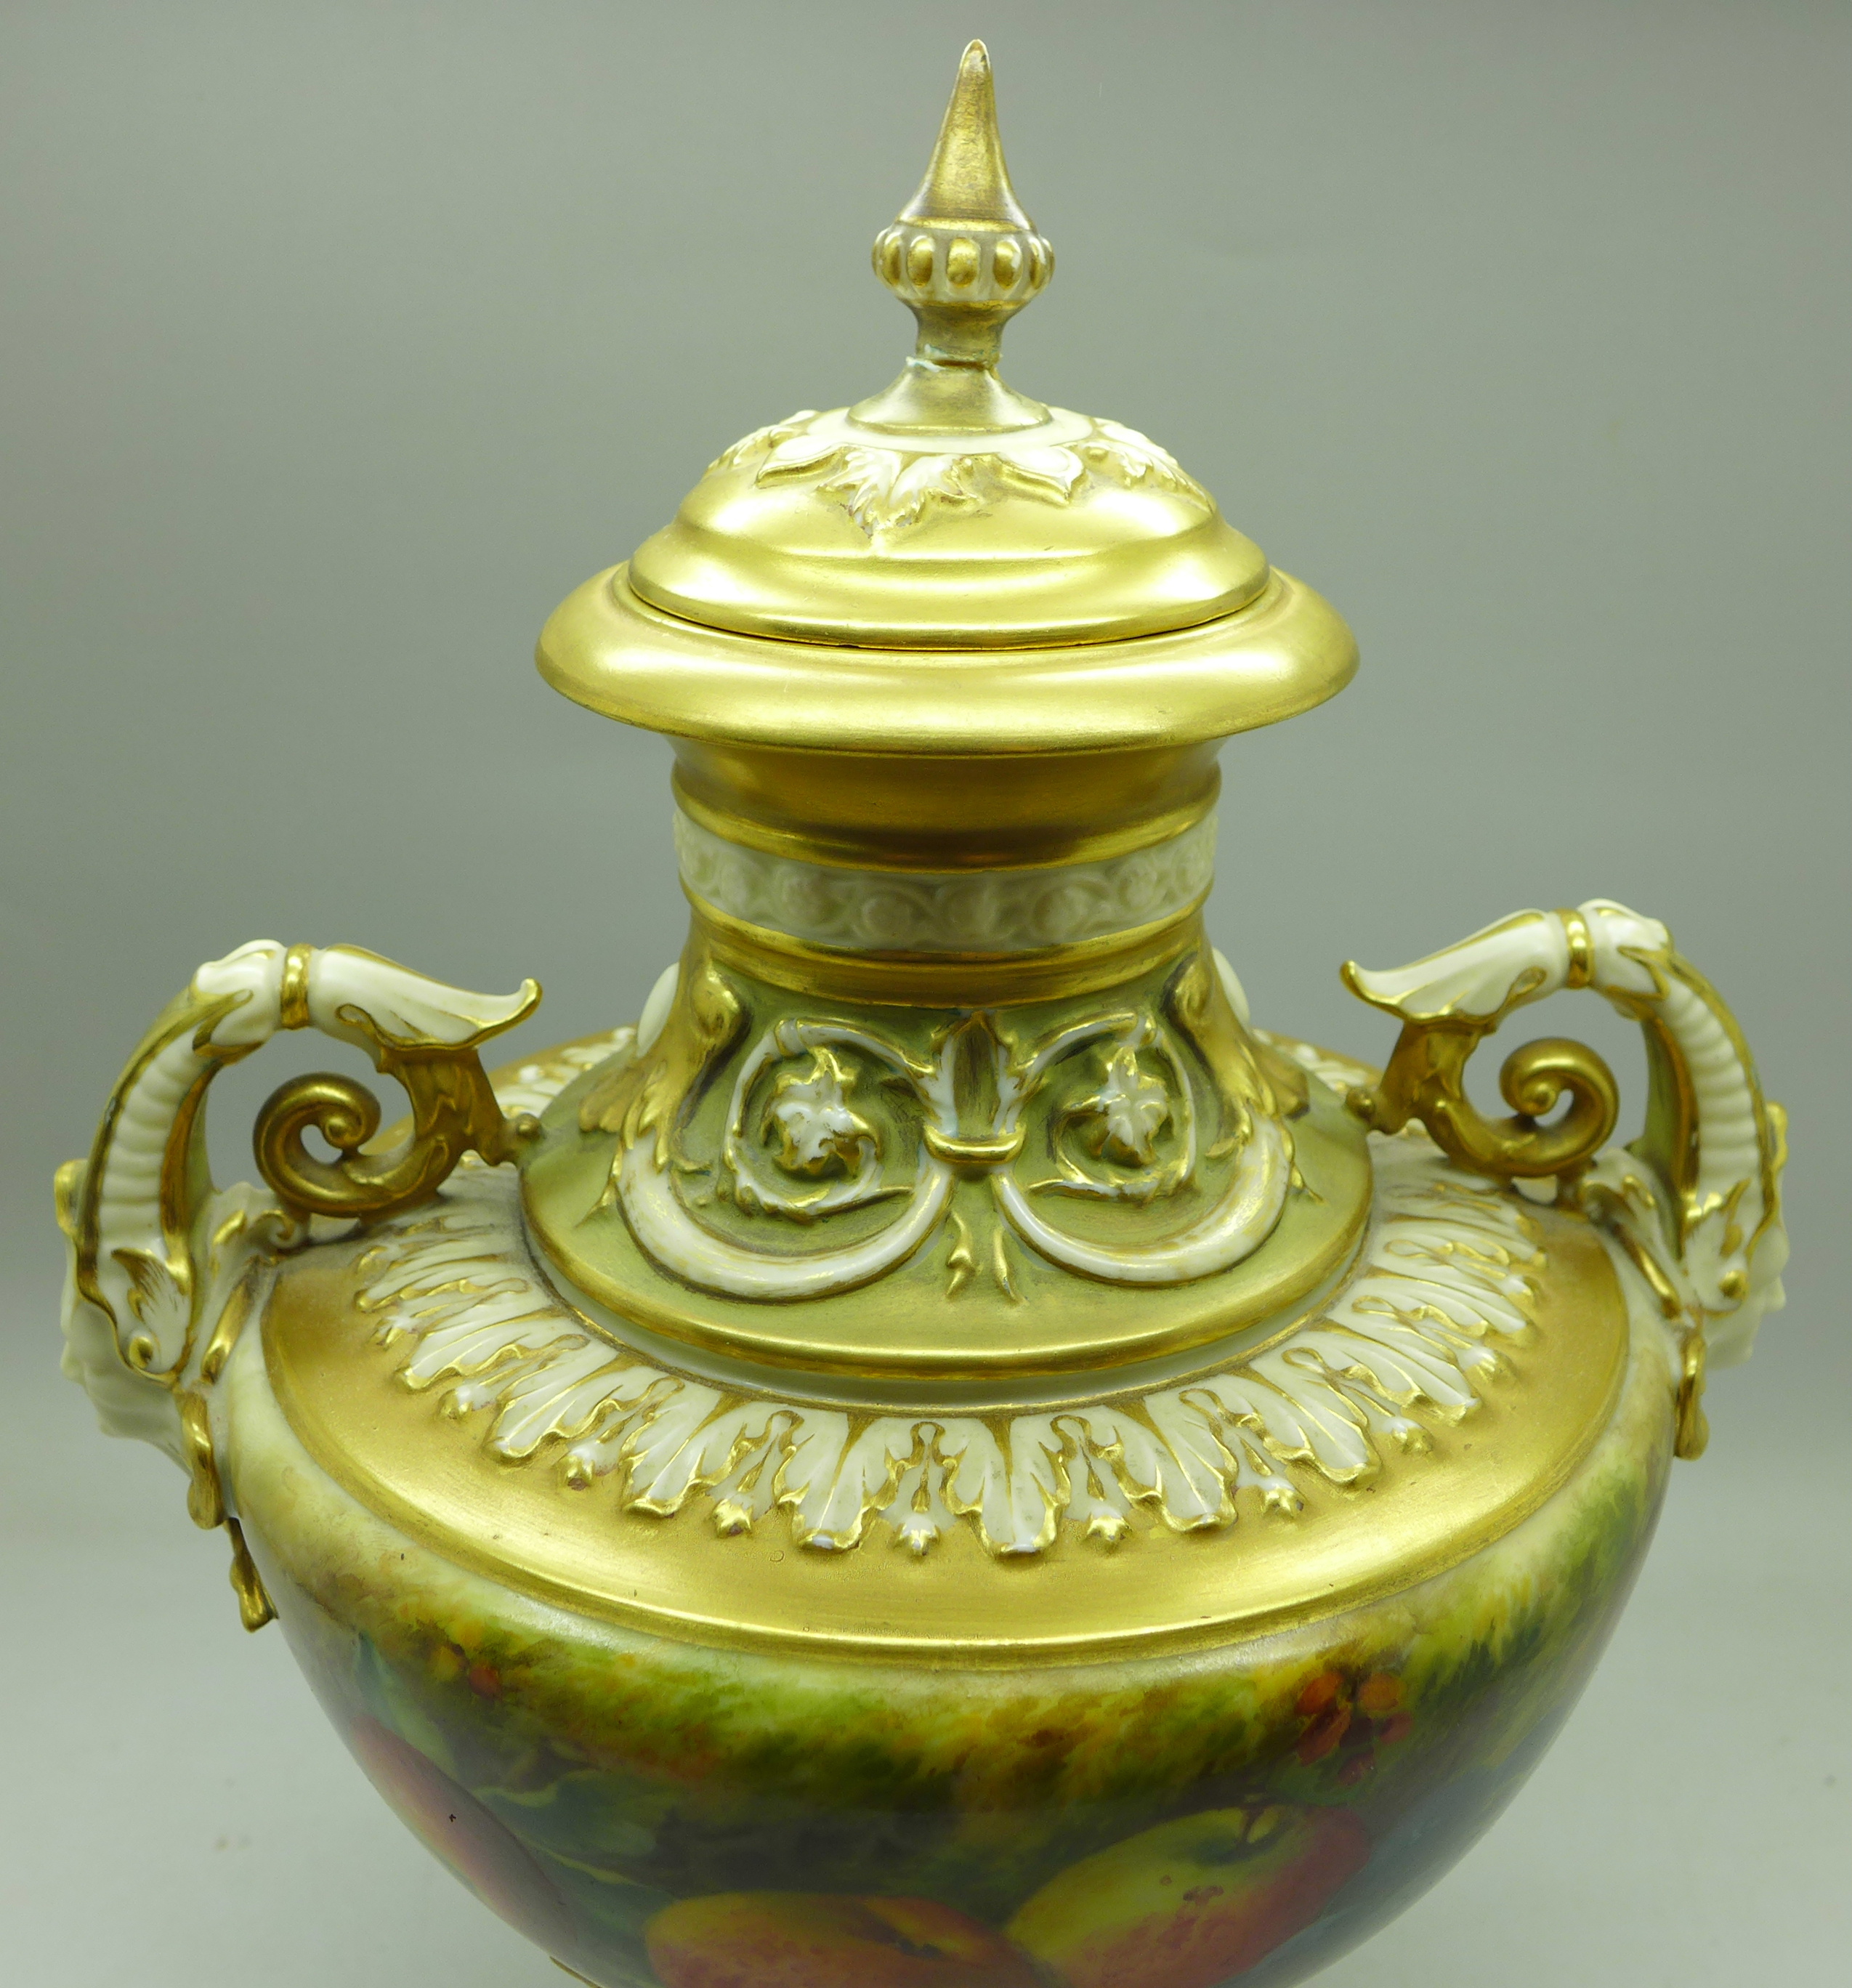 A 1925 Royal Worcester hand decorated lidded vase, 1572, signed (William) Ricketts, finial on lid - Image 7 of 11